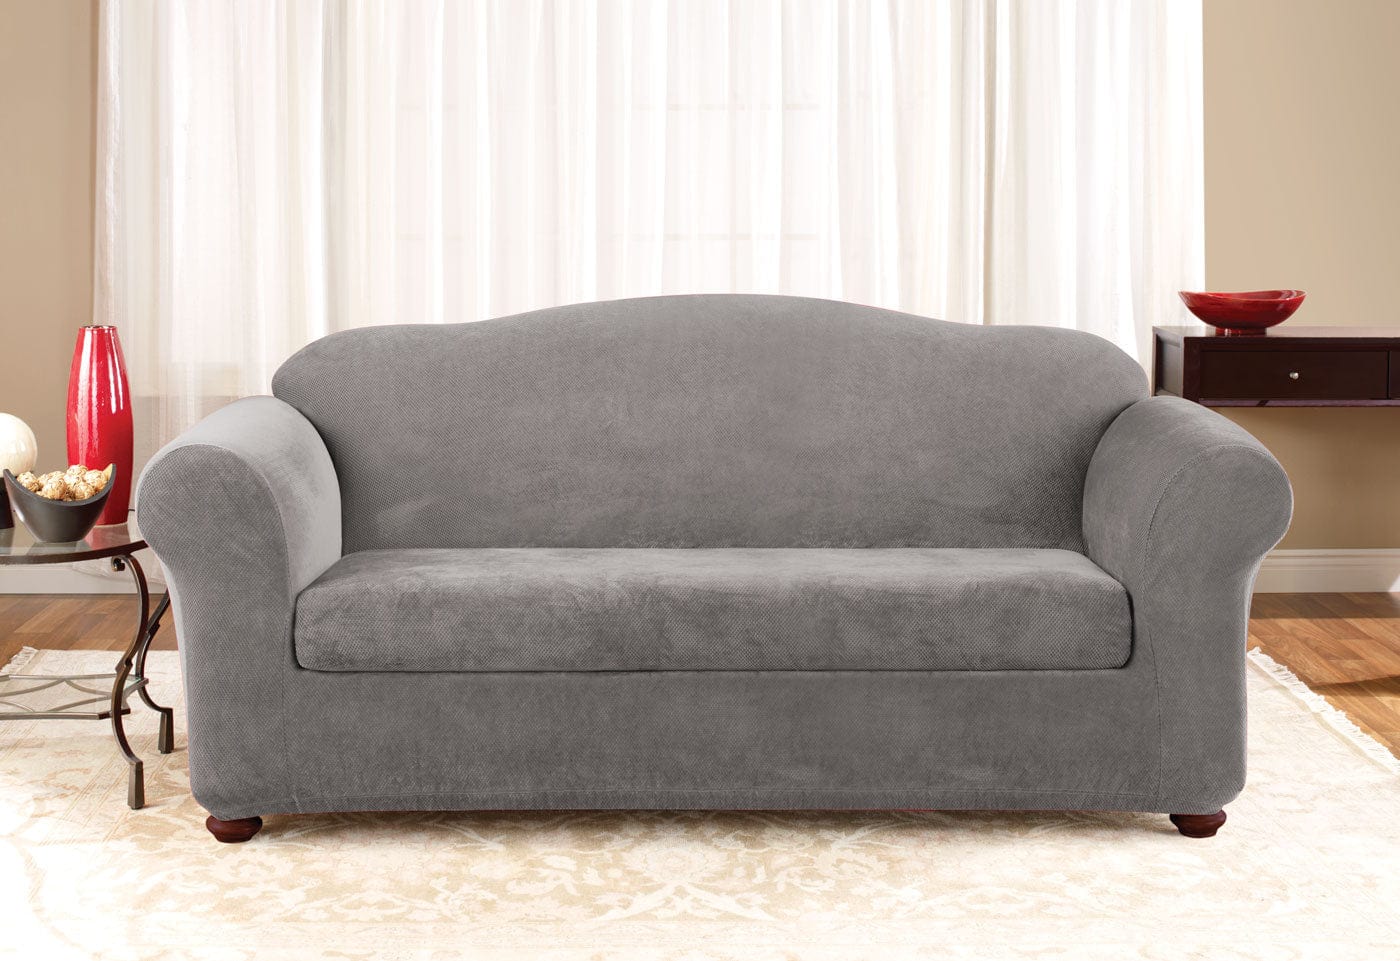 Stretch Piqué Two Piece Sofa Slipcover   Form Fit   Waffle-Knit Pattern   Machine Washable in Flannel Grey SureFit